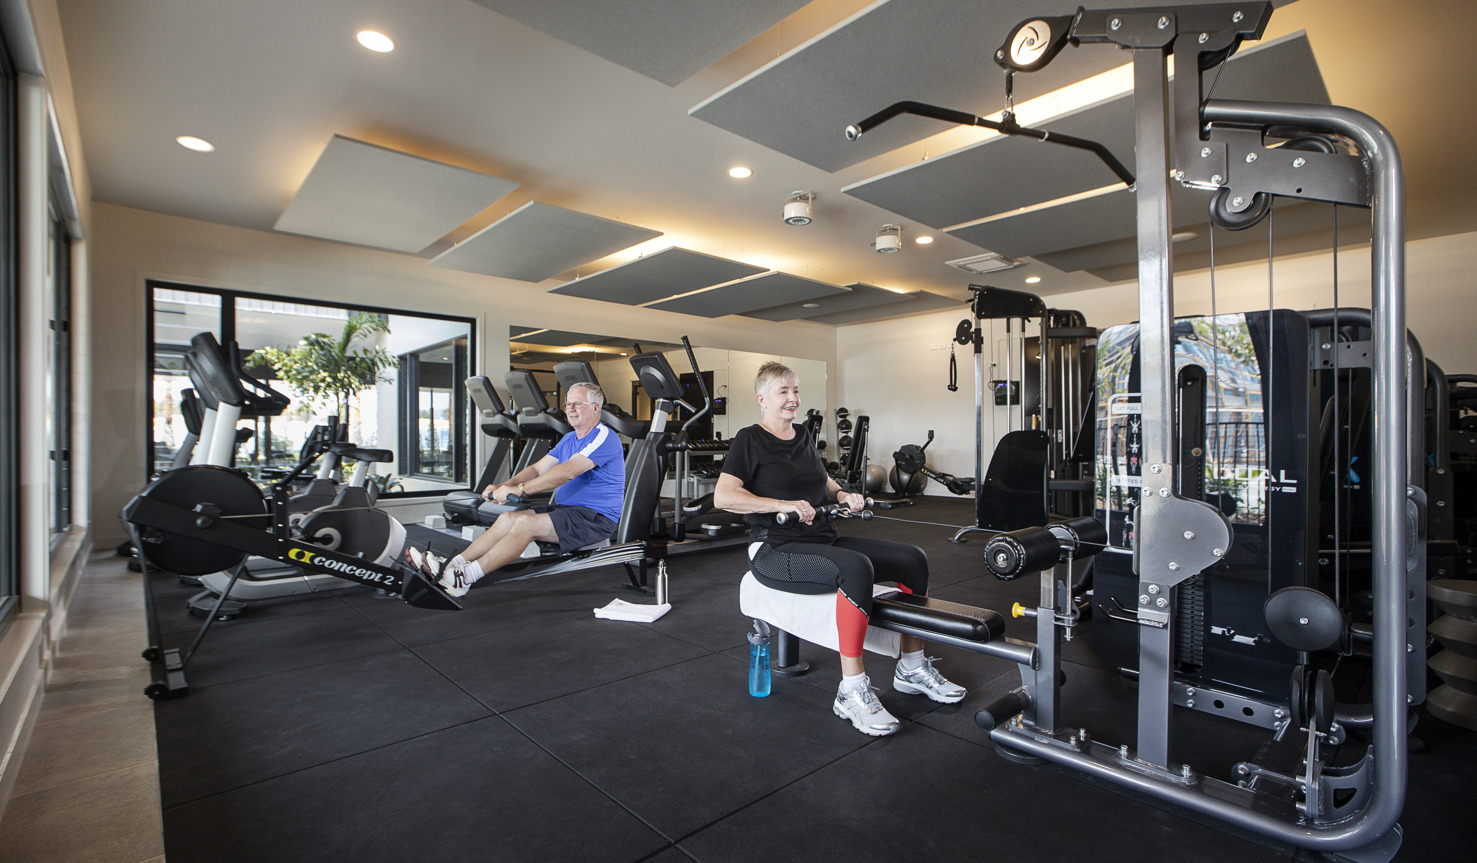 Action shot of Homeowners using exercising machines in the Halcyon Greens gym